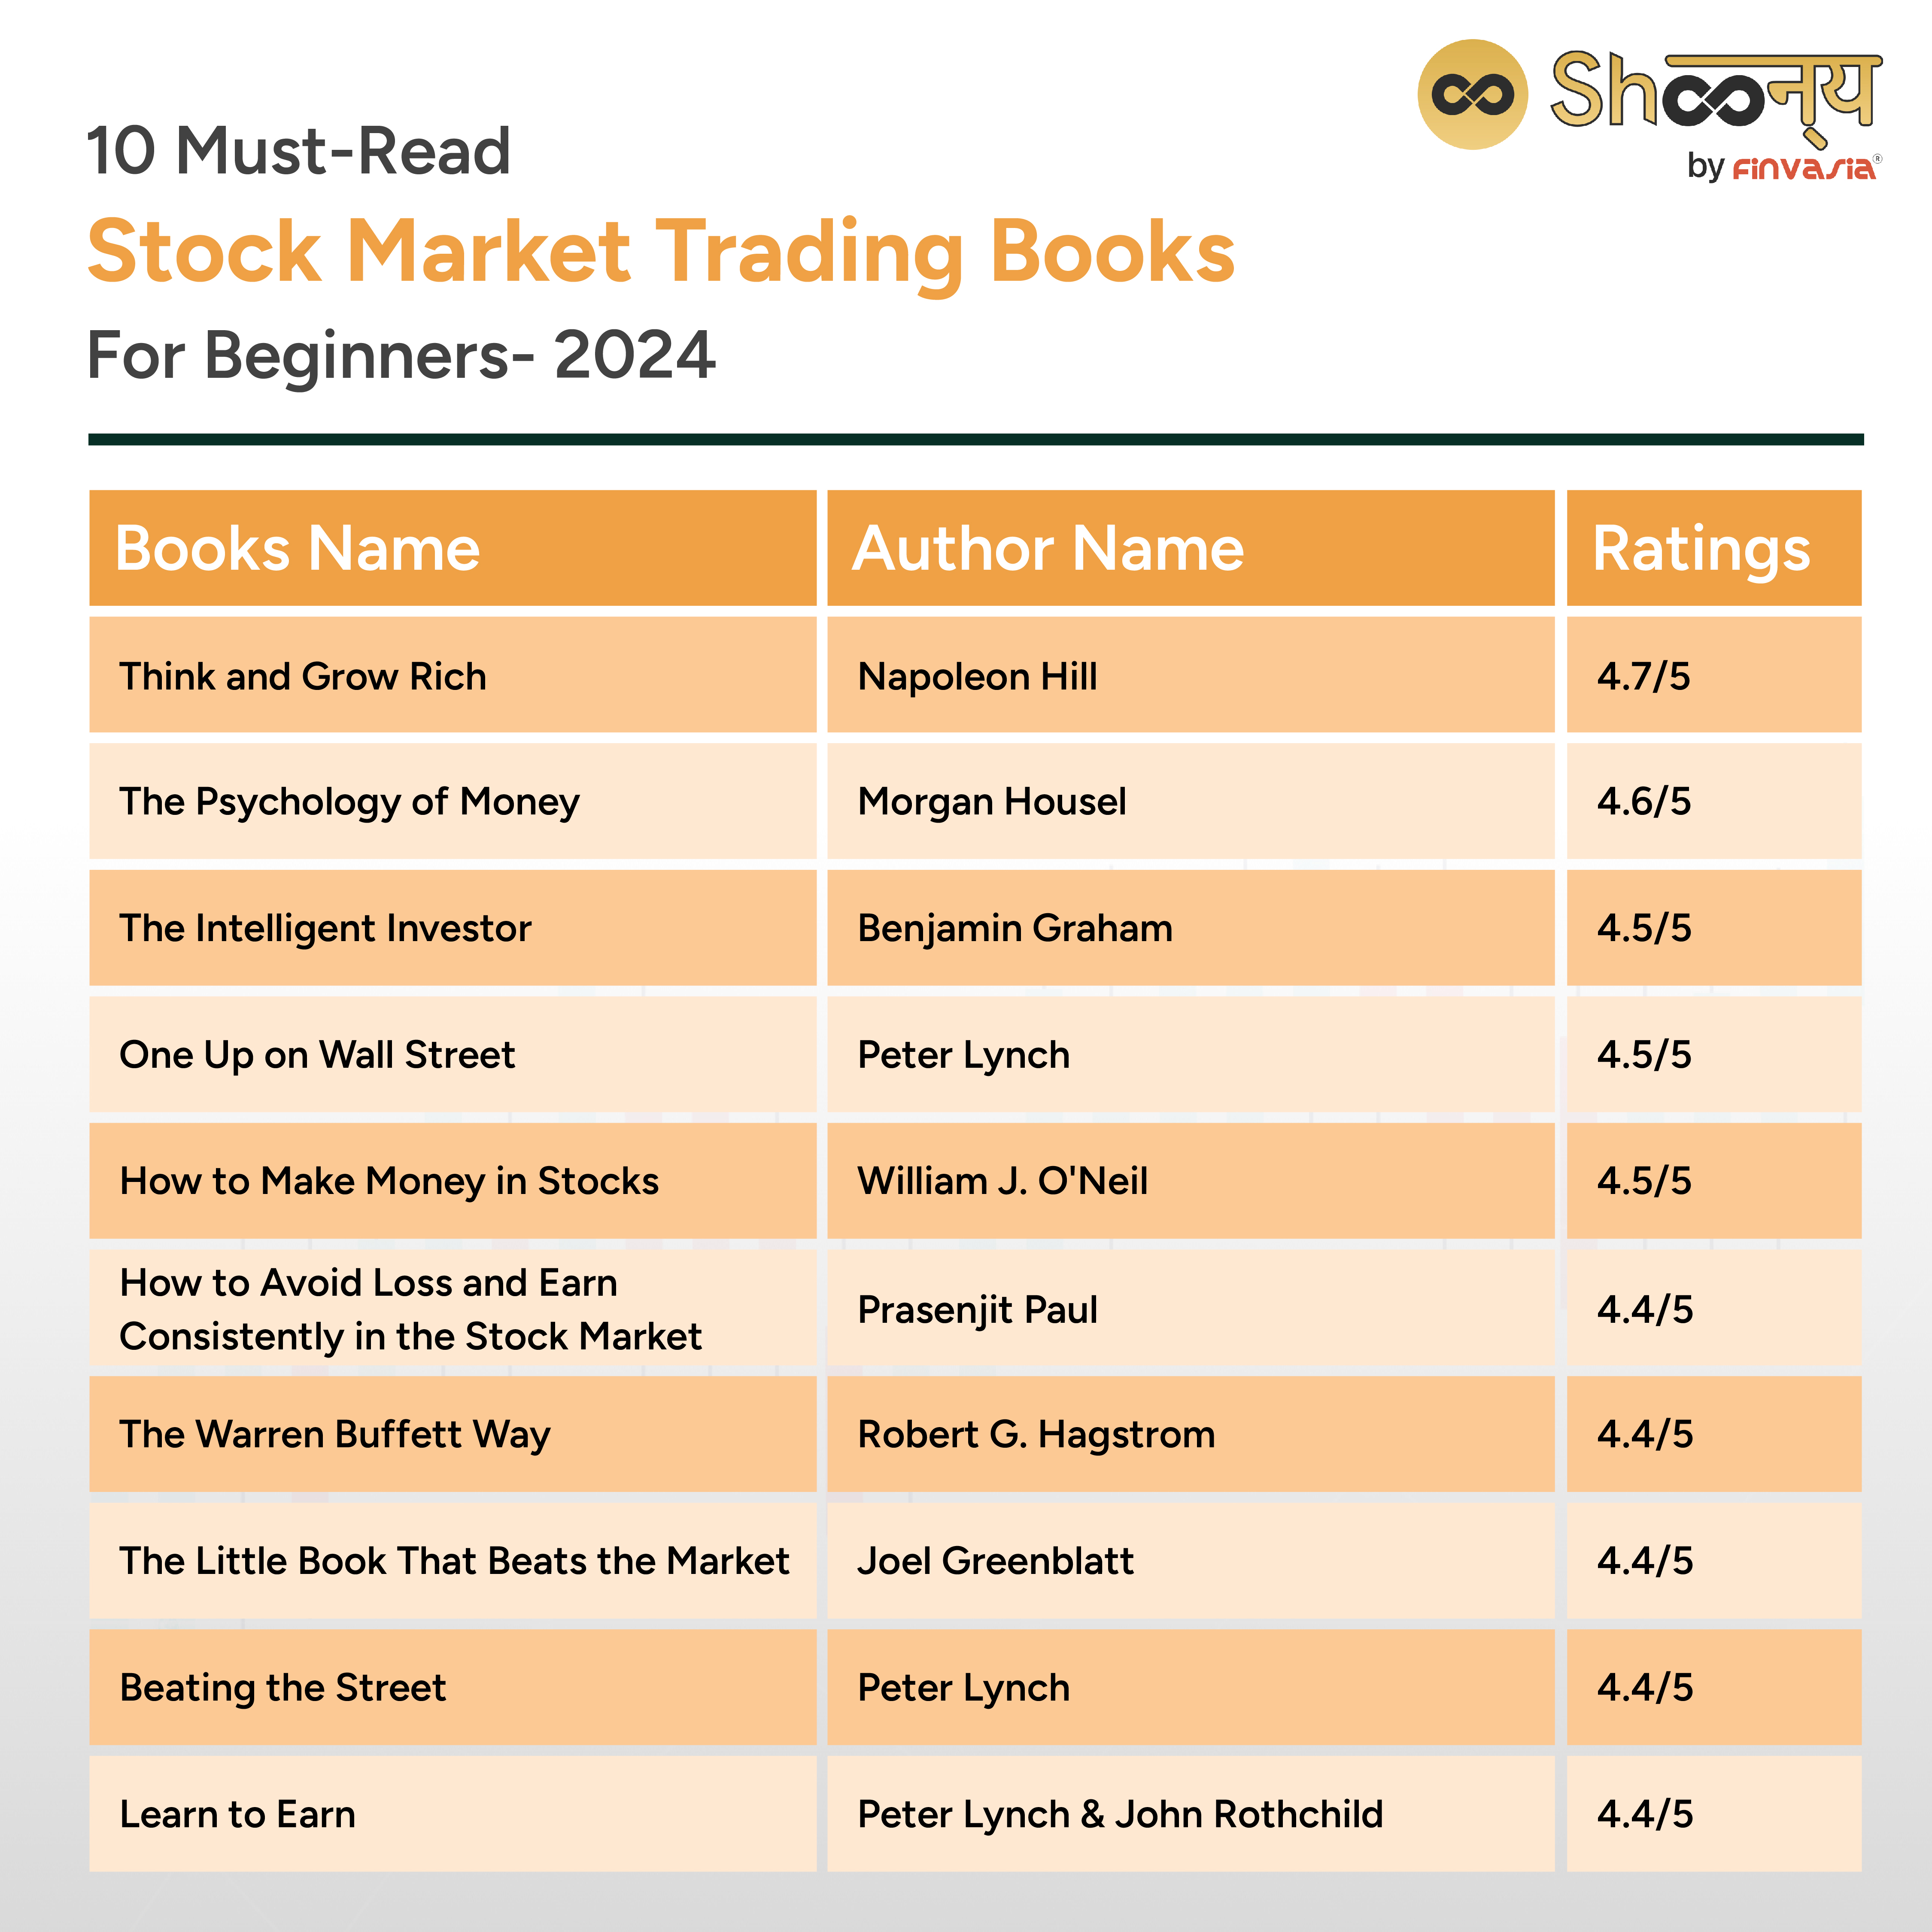 10 Must-Read Stock Market Trading Books For Beginners- 2024